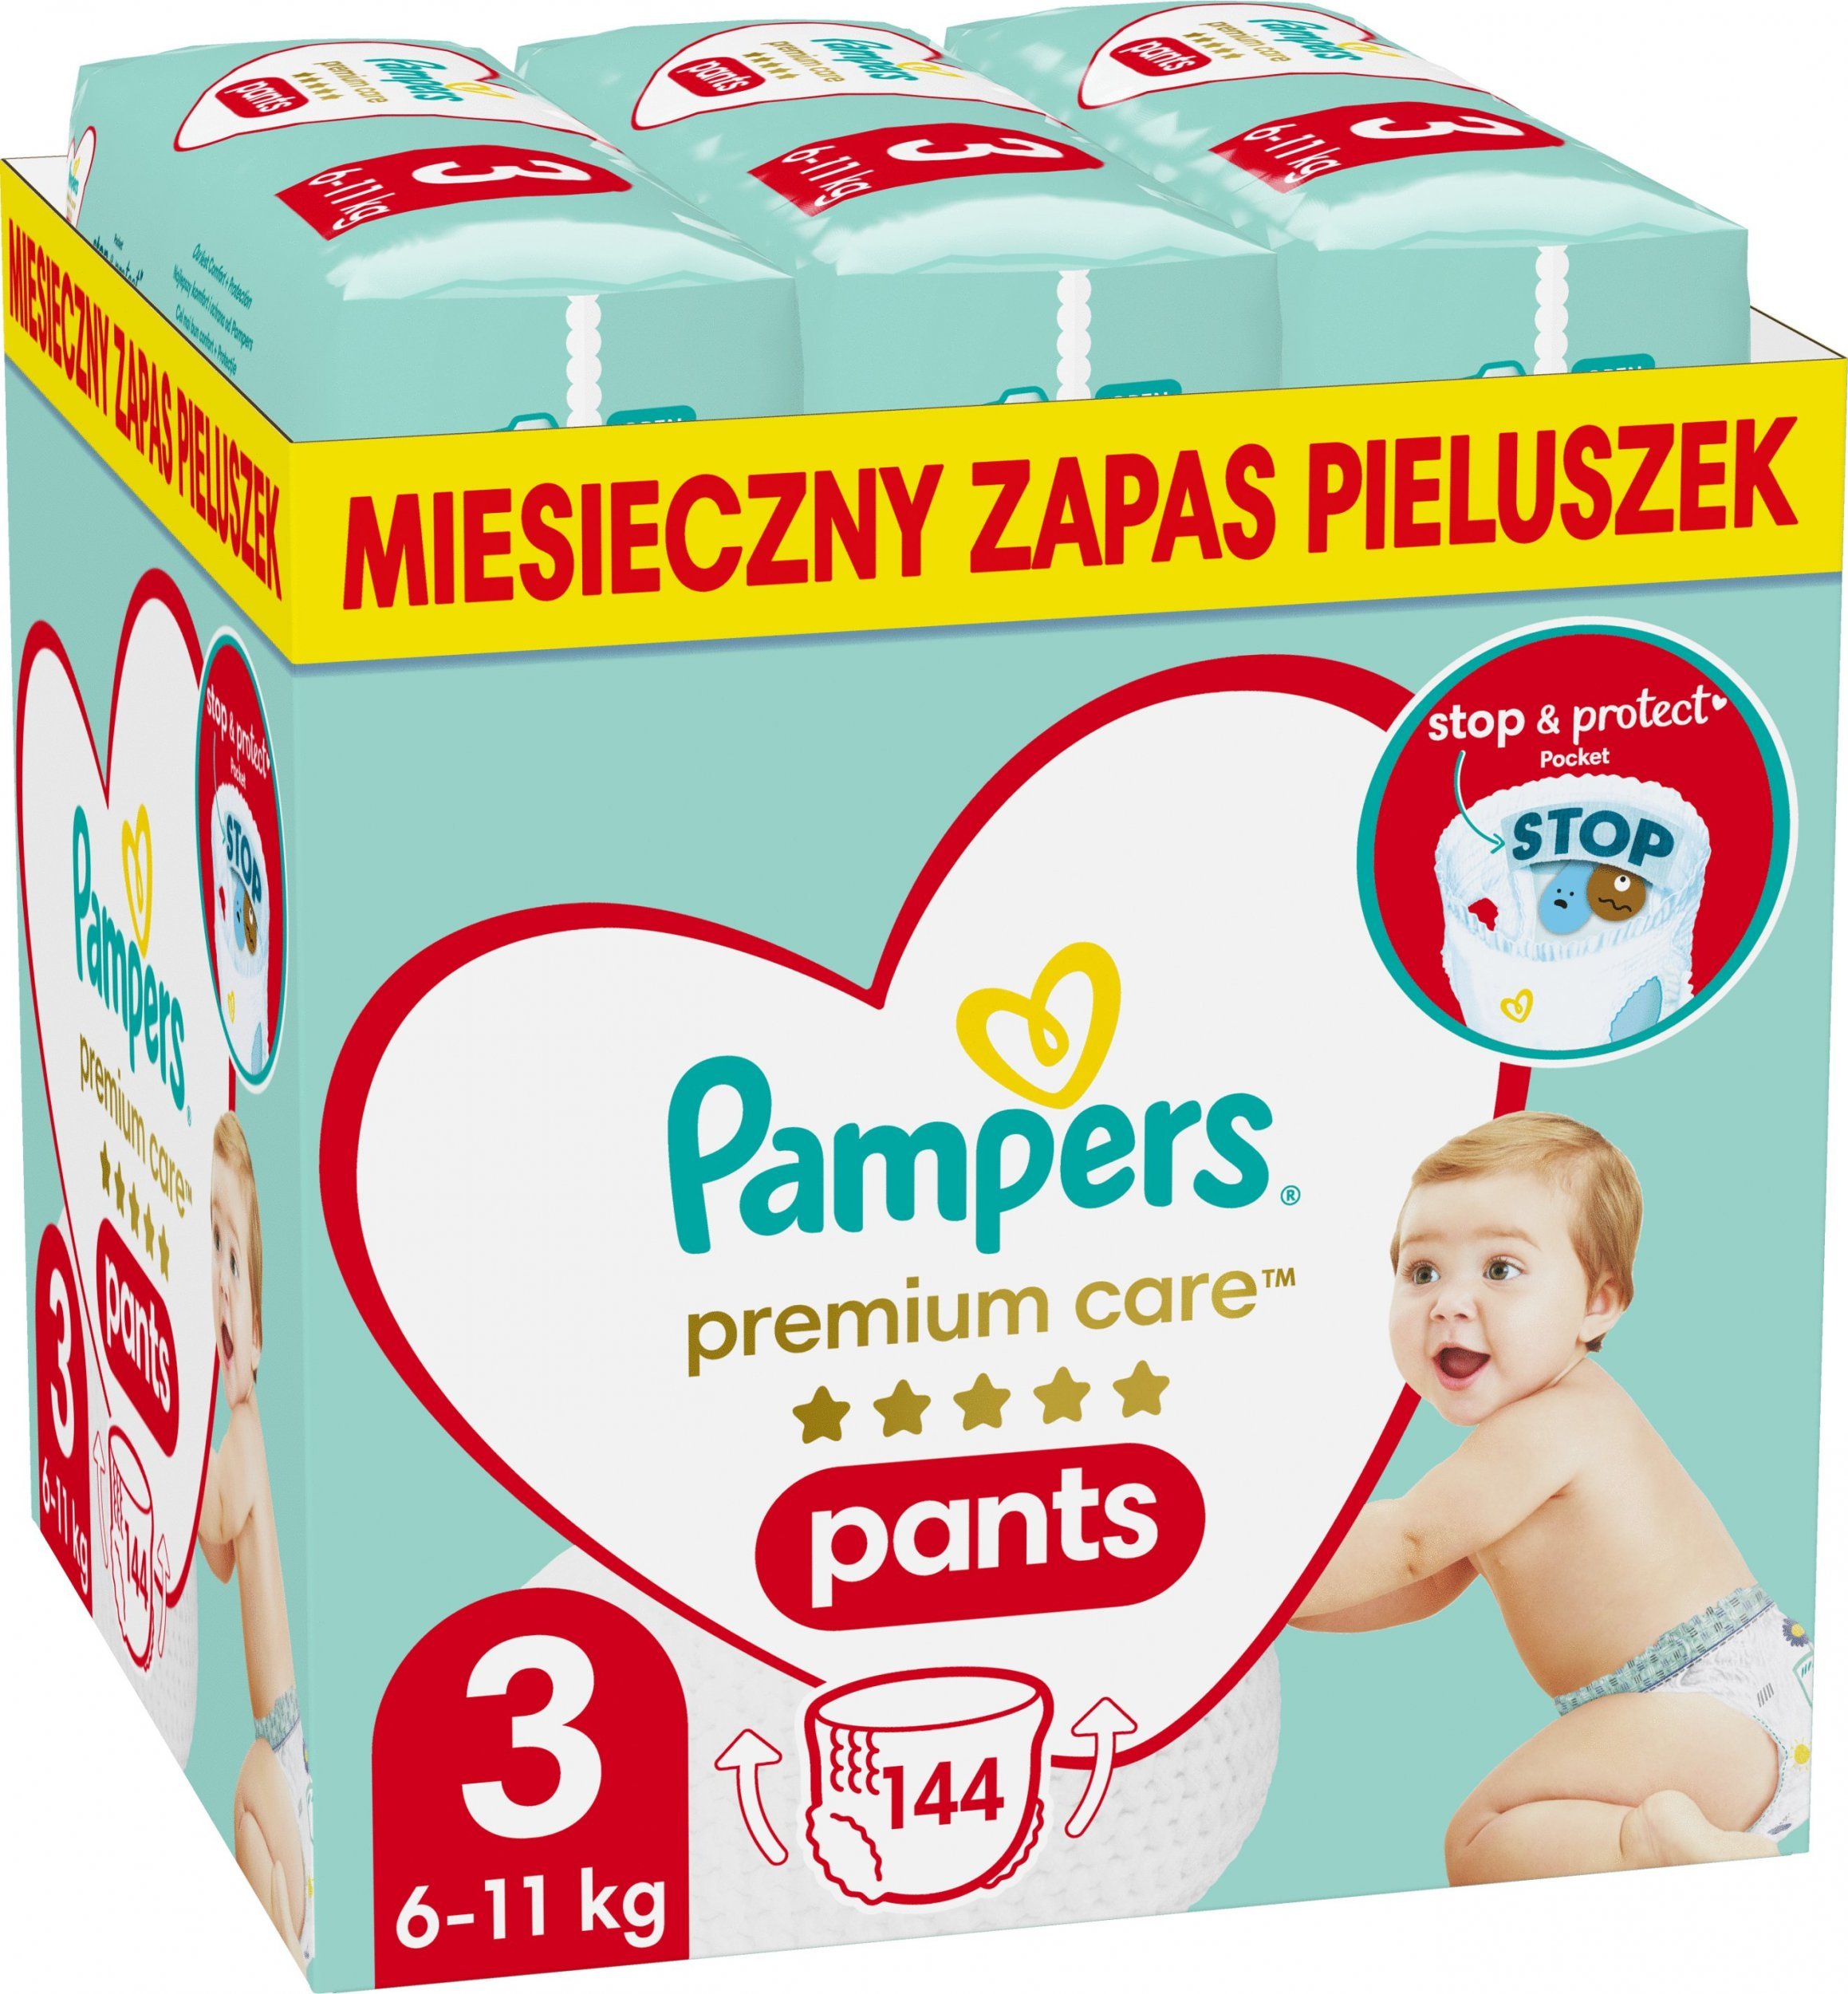 pampers active baby dry 3 126